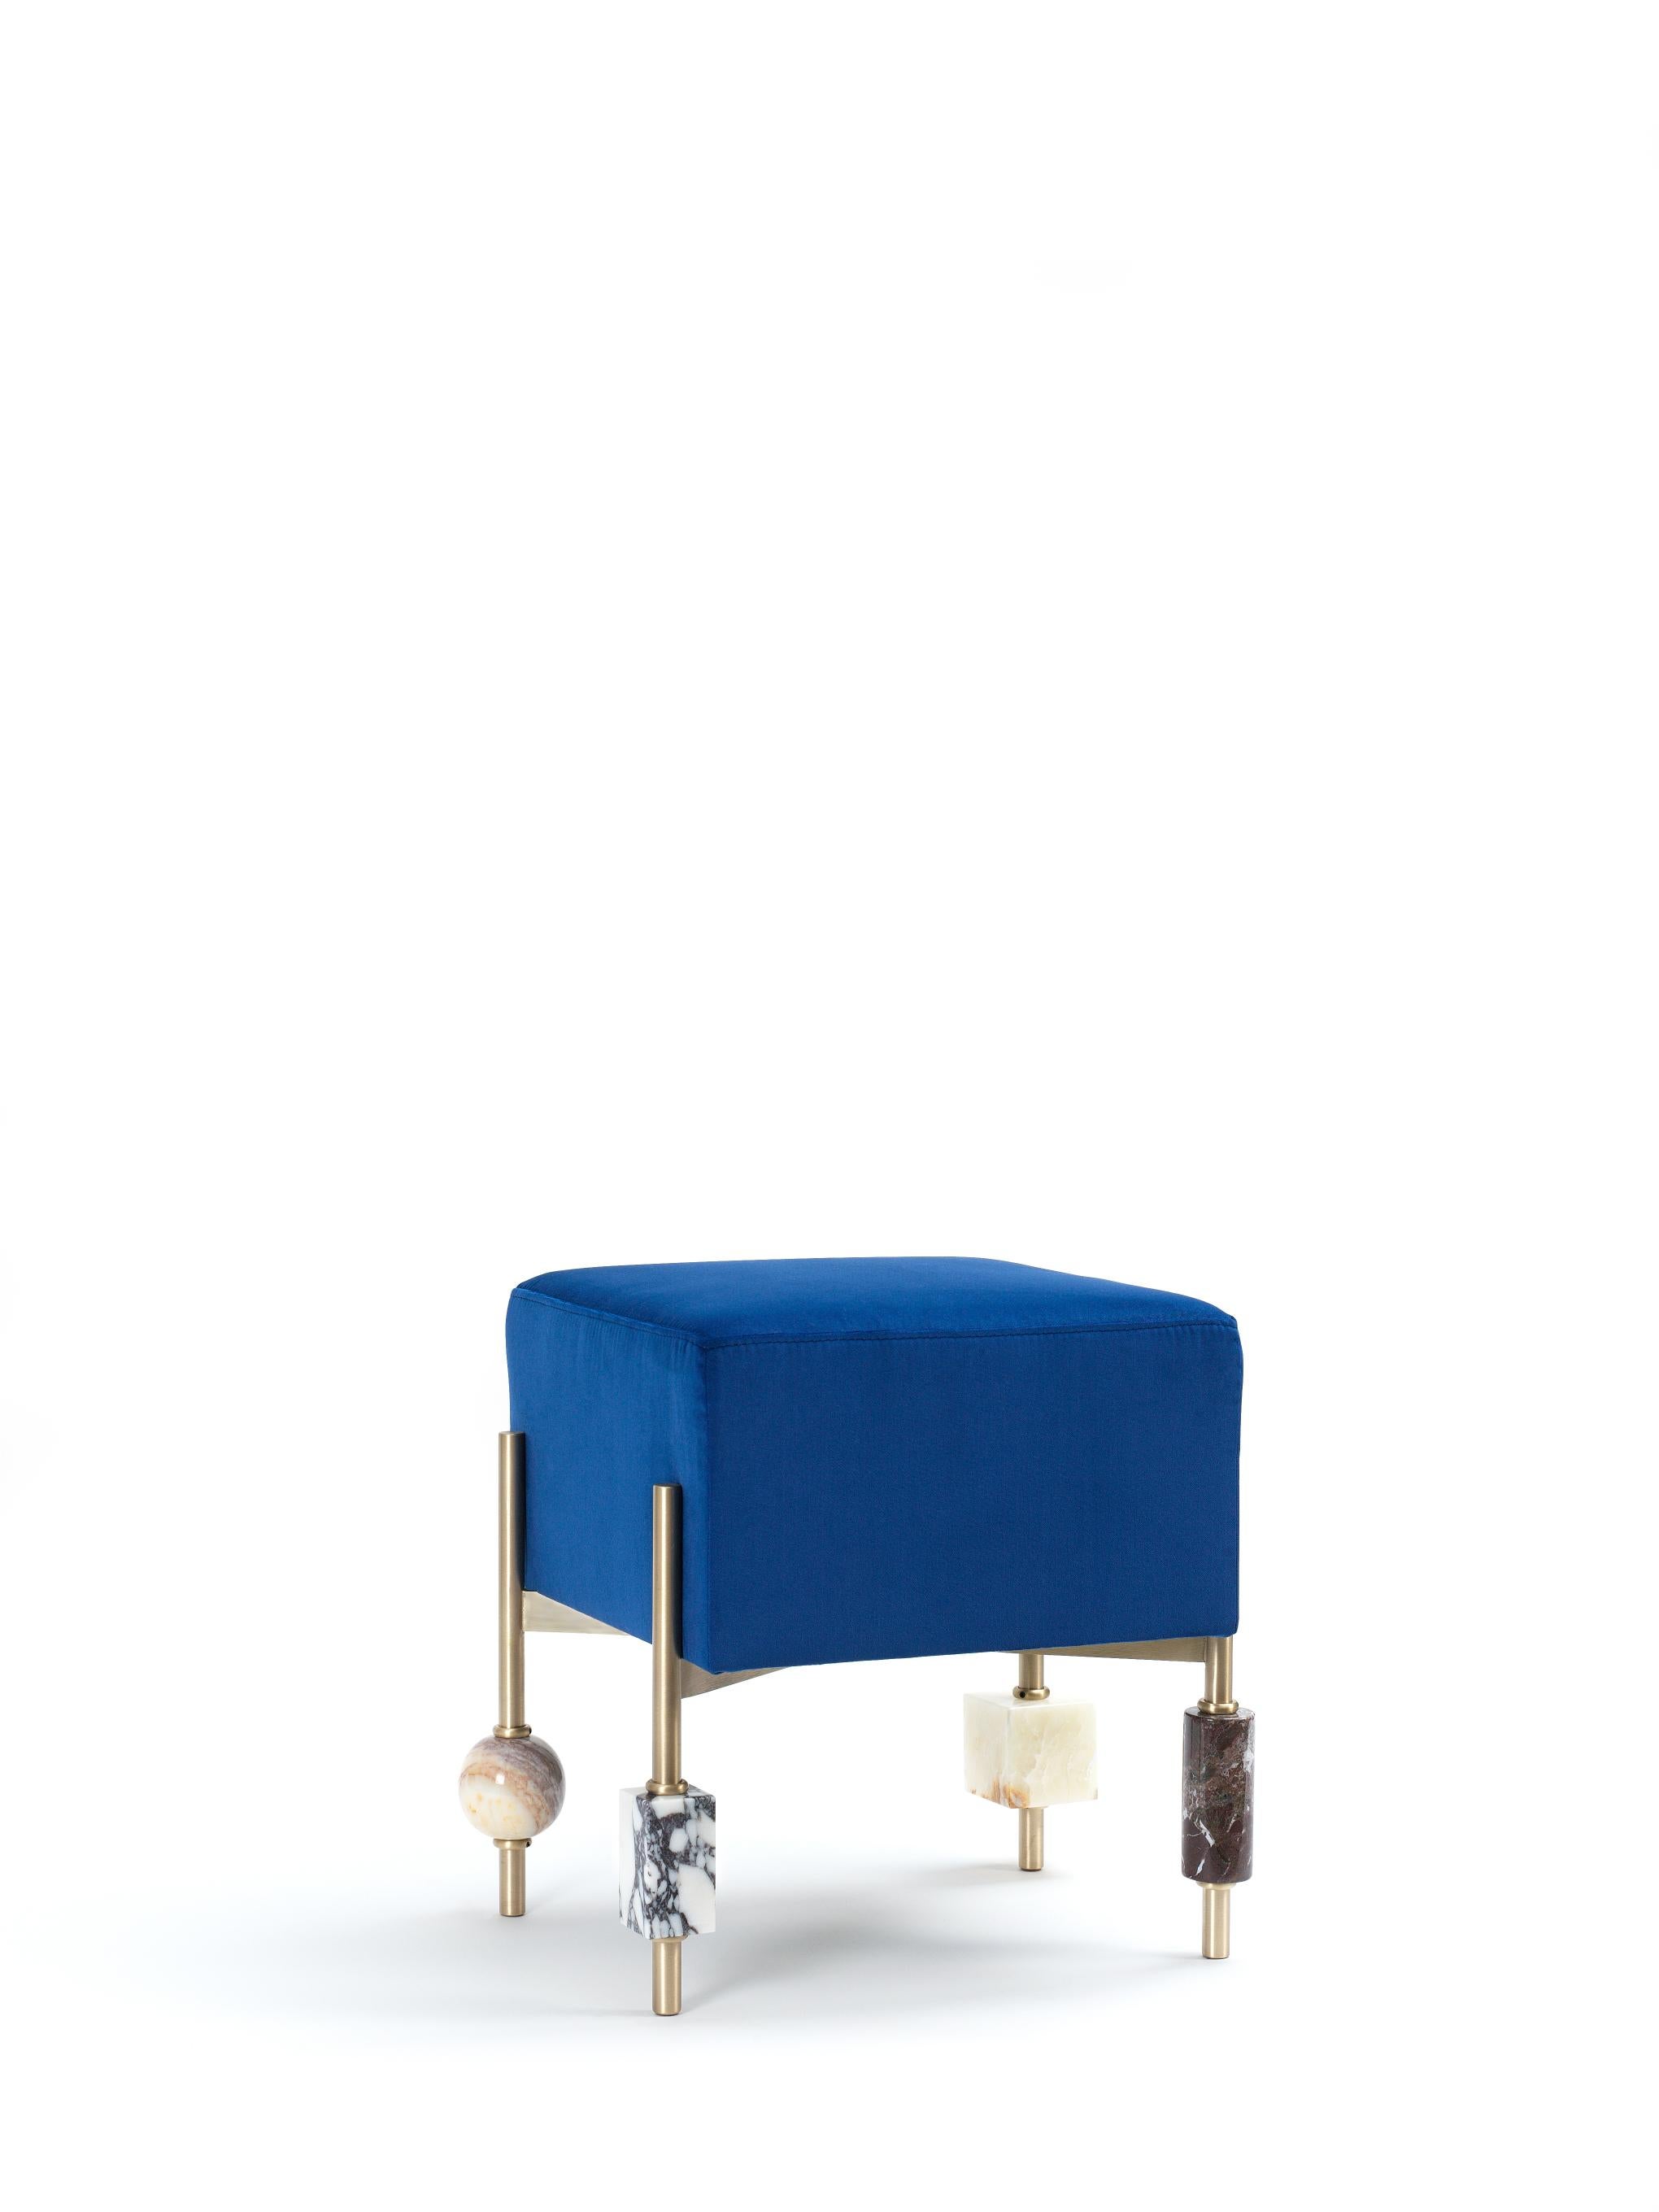 Plato pouf no 2 by Yasemin Toygar
Dimensions: W 40 x D 40 x H 46 cm
Materials: satin brass, marble and onyx, blue velvet fabric


Plato Collection

Inspired by the geometric still life, Plato explores and defies the boundaries of sensory